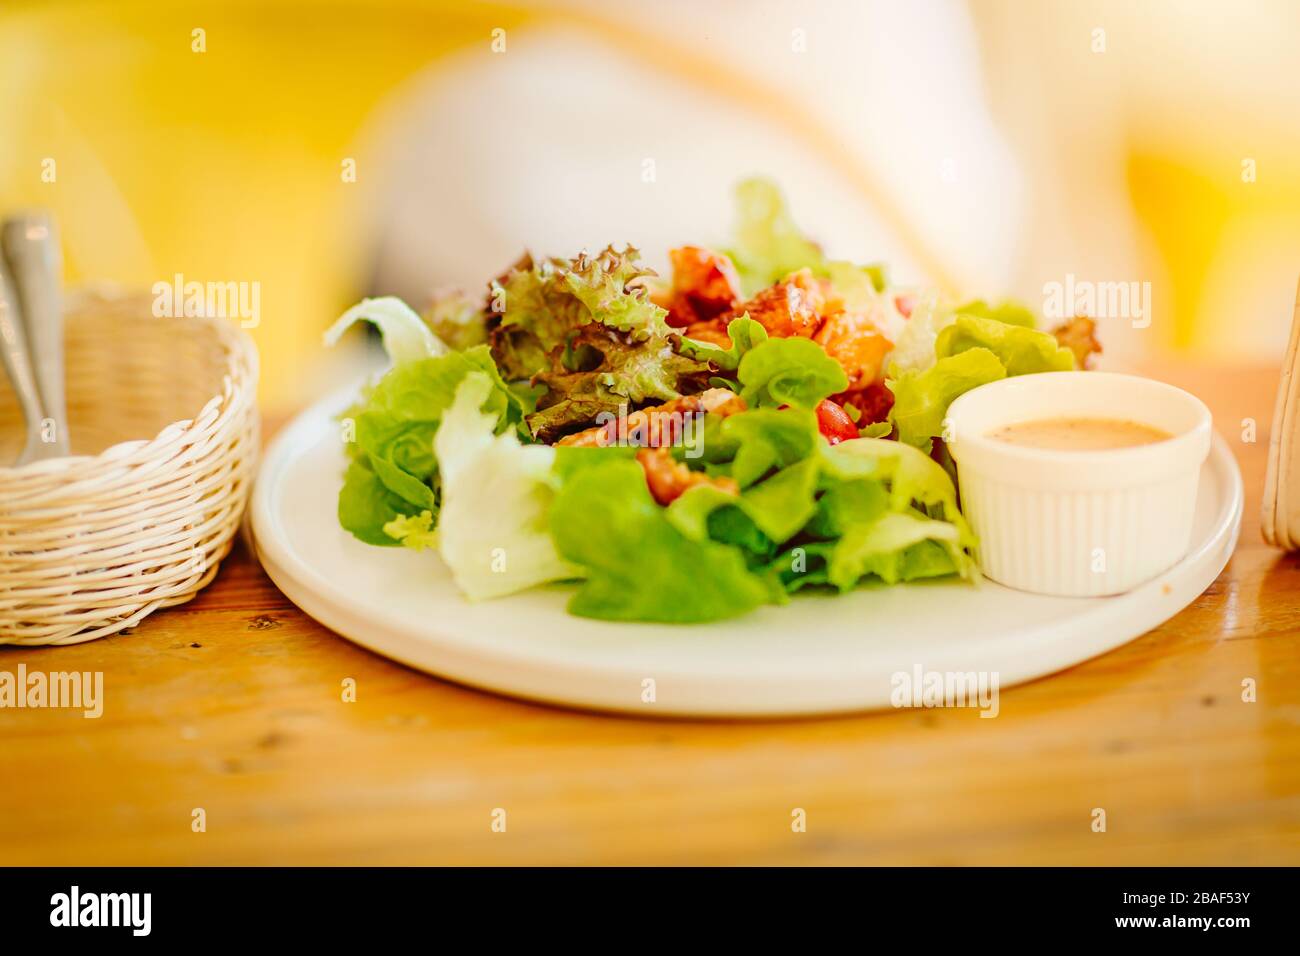 vegetable salad vegan menu fresh clean food with cream sauce for healthy on wooden table Stock Photo